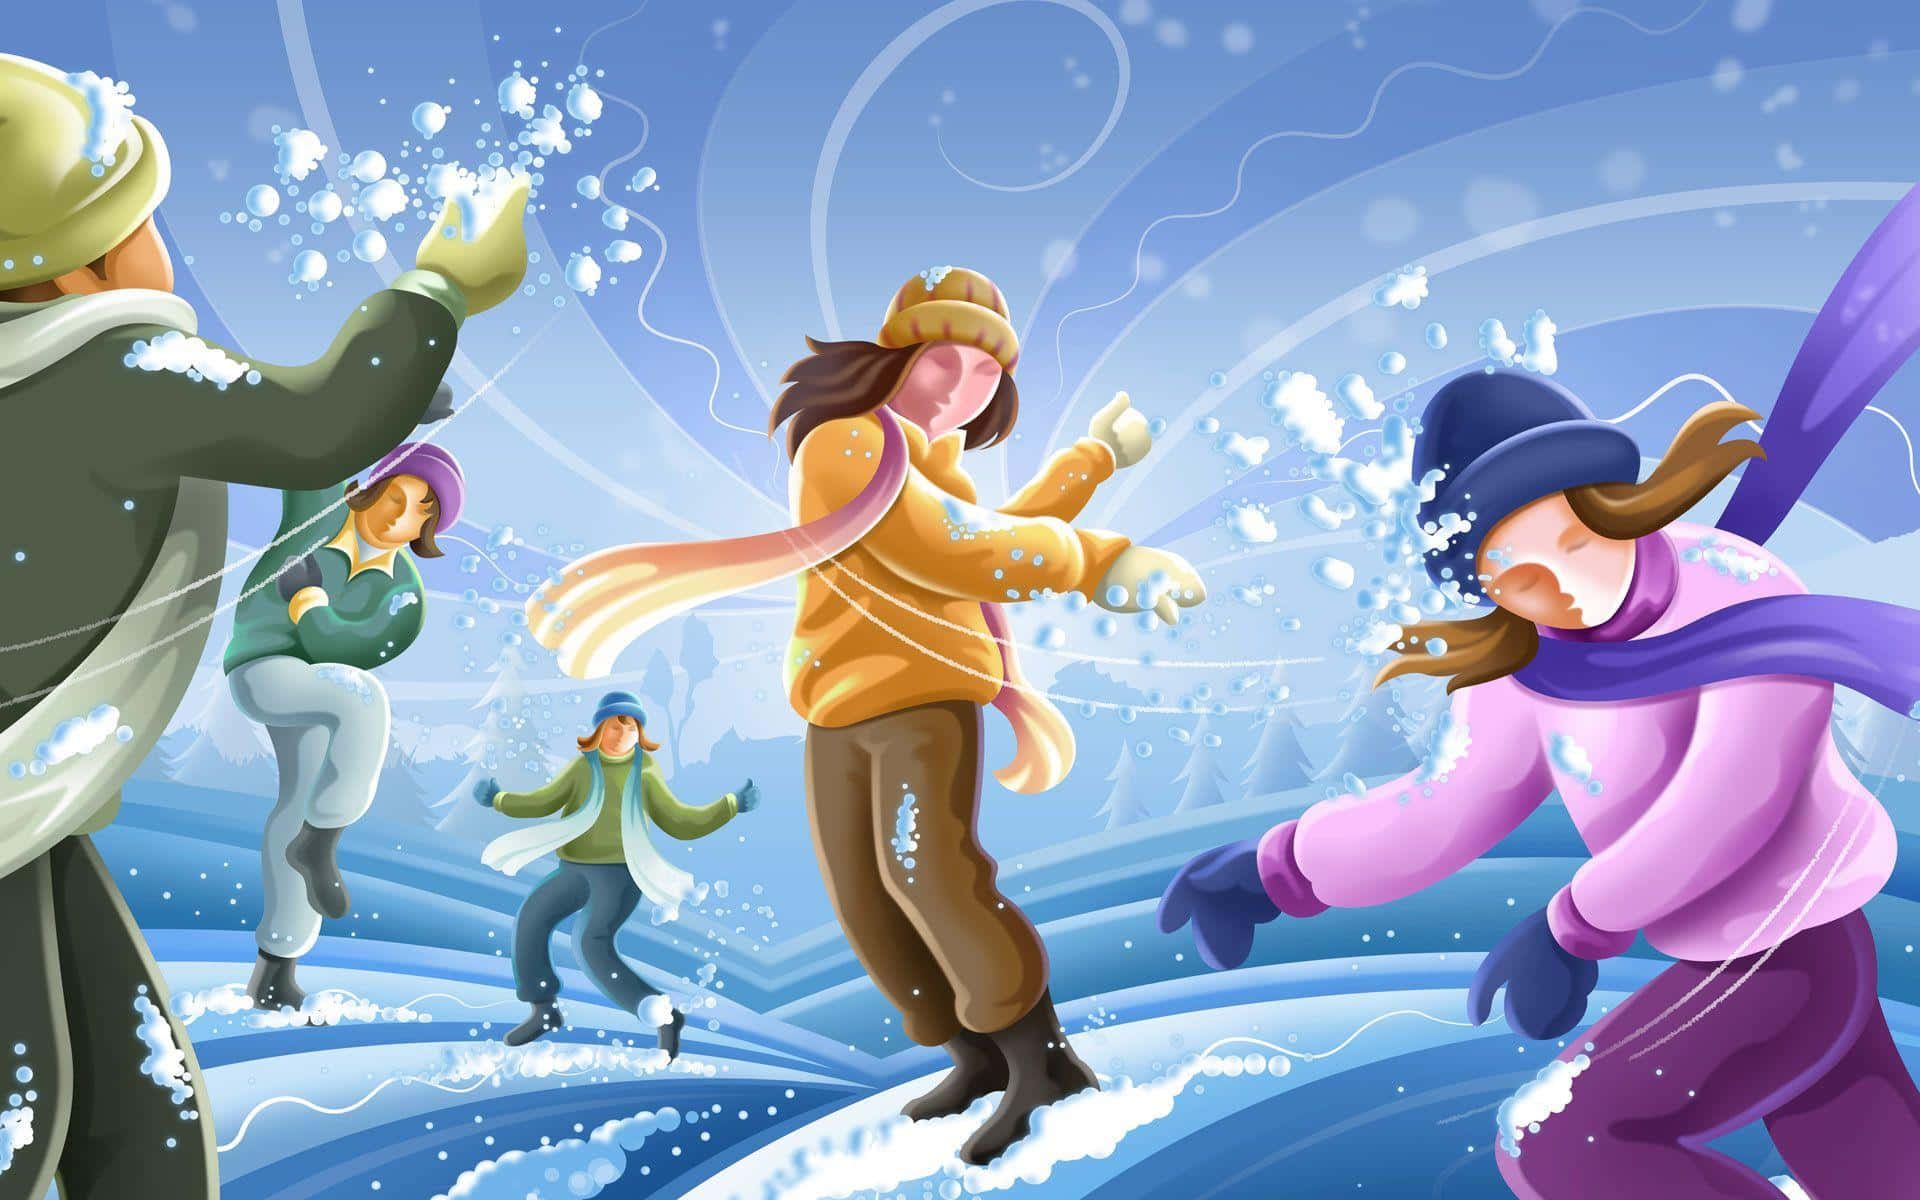 Winter Fun - Exciting Snowball Fight in the Park Wallpaper